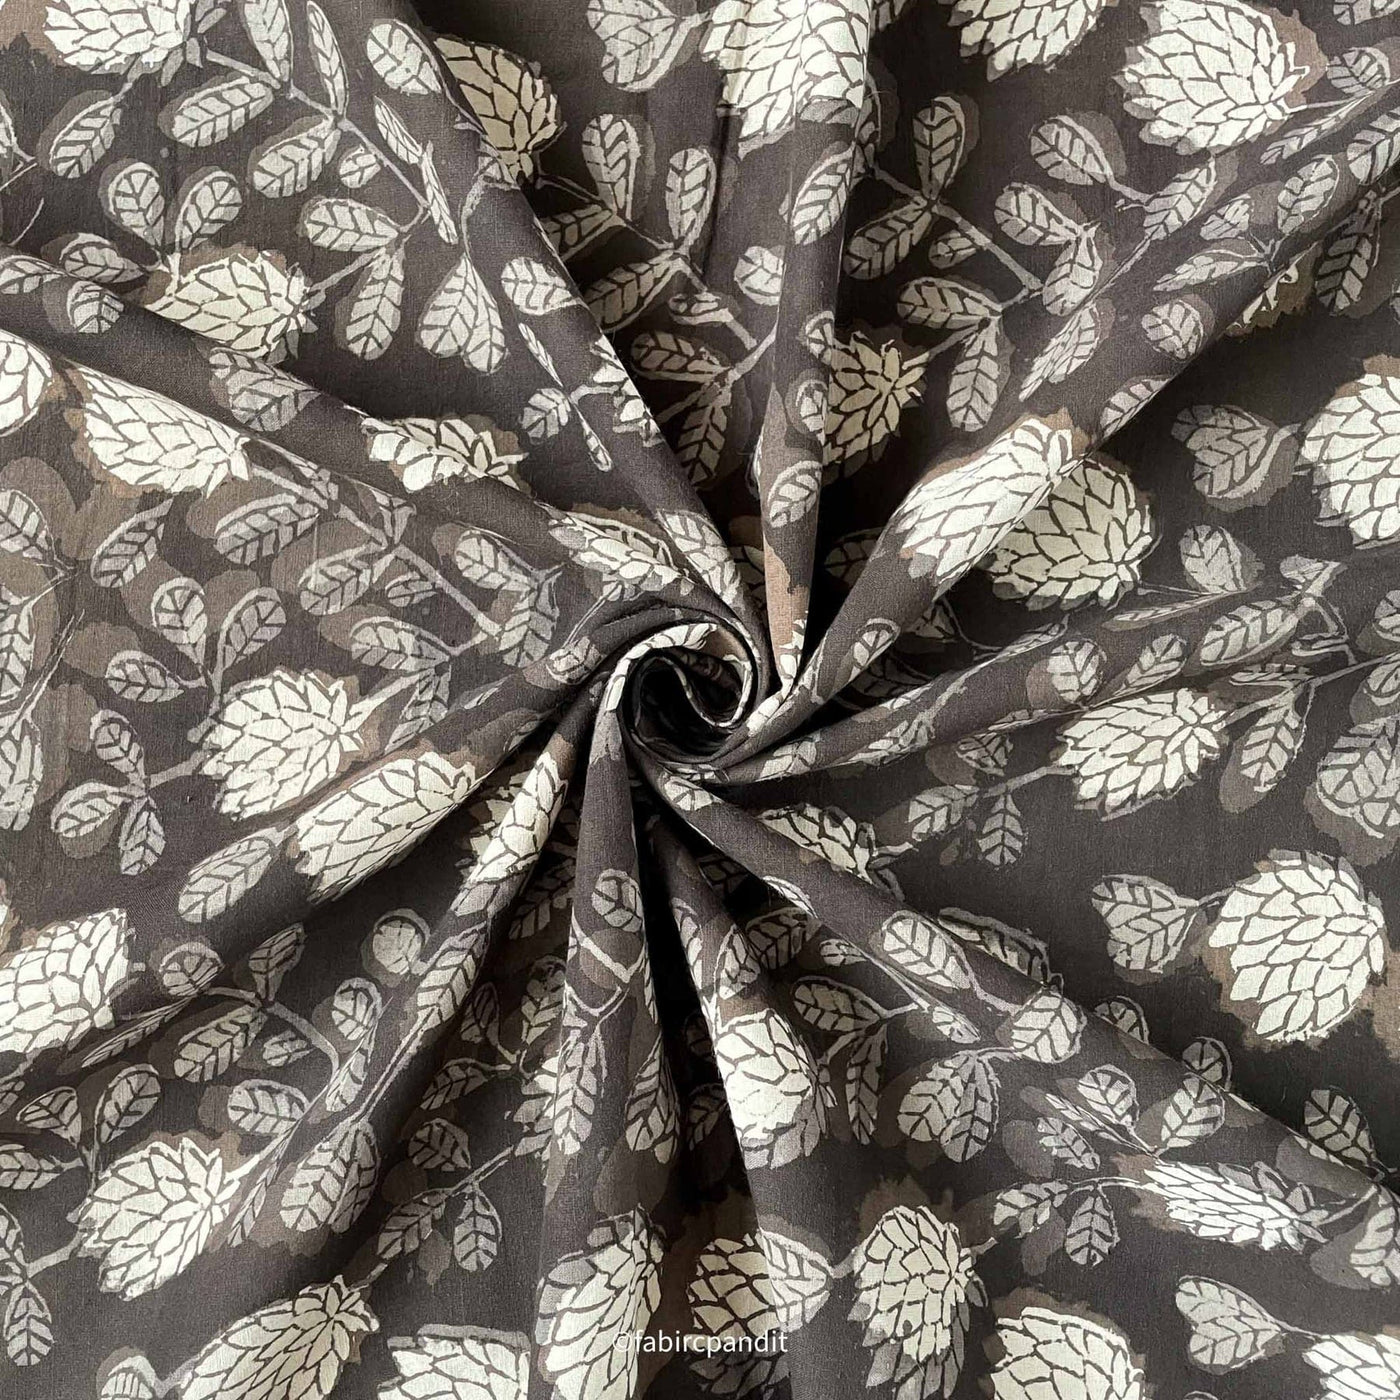 Fabric Pandit Fabric Deep Brown Indigo Dabu Natural Dyed Autumn Leaves Hand Block Printed Pure Cotton Fabric (Width 43 inches)